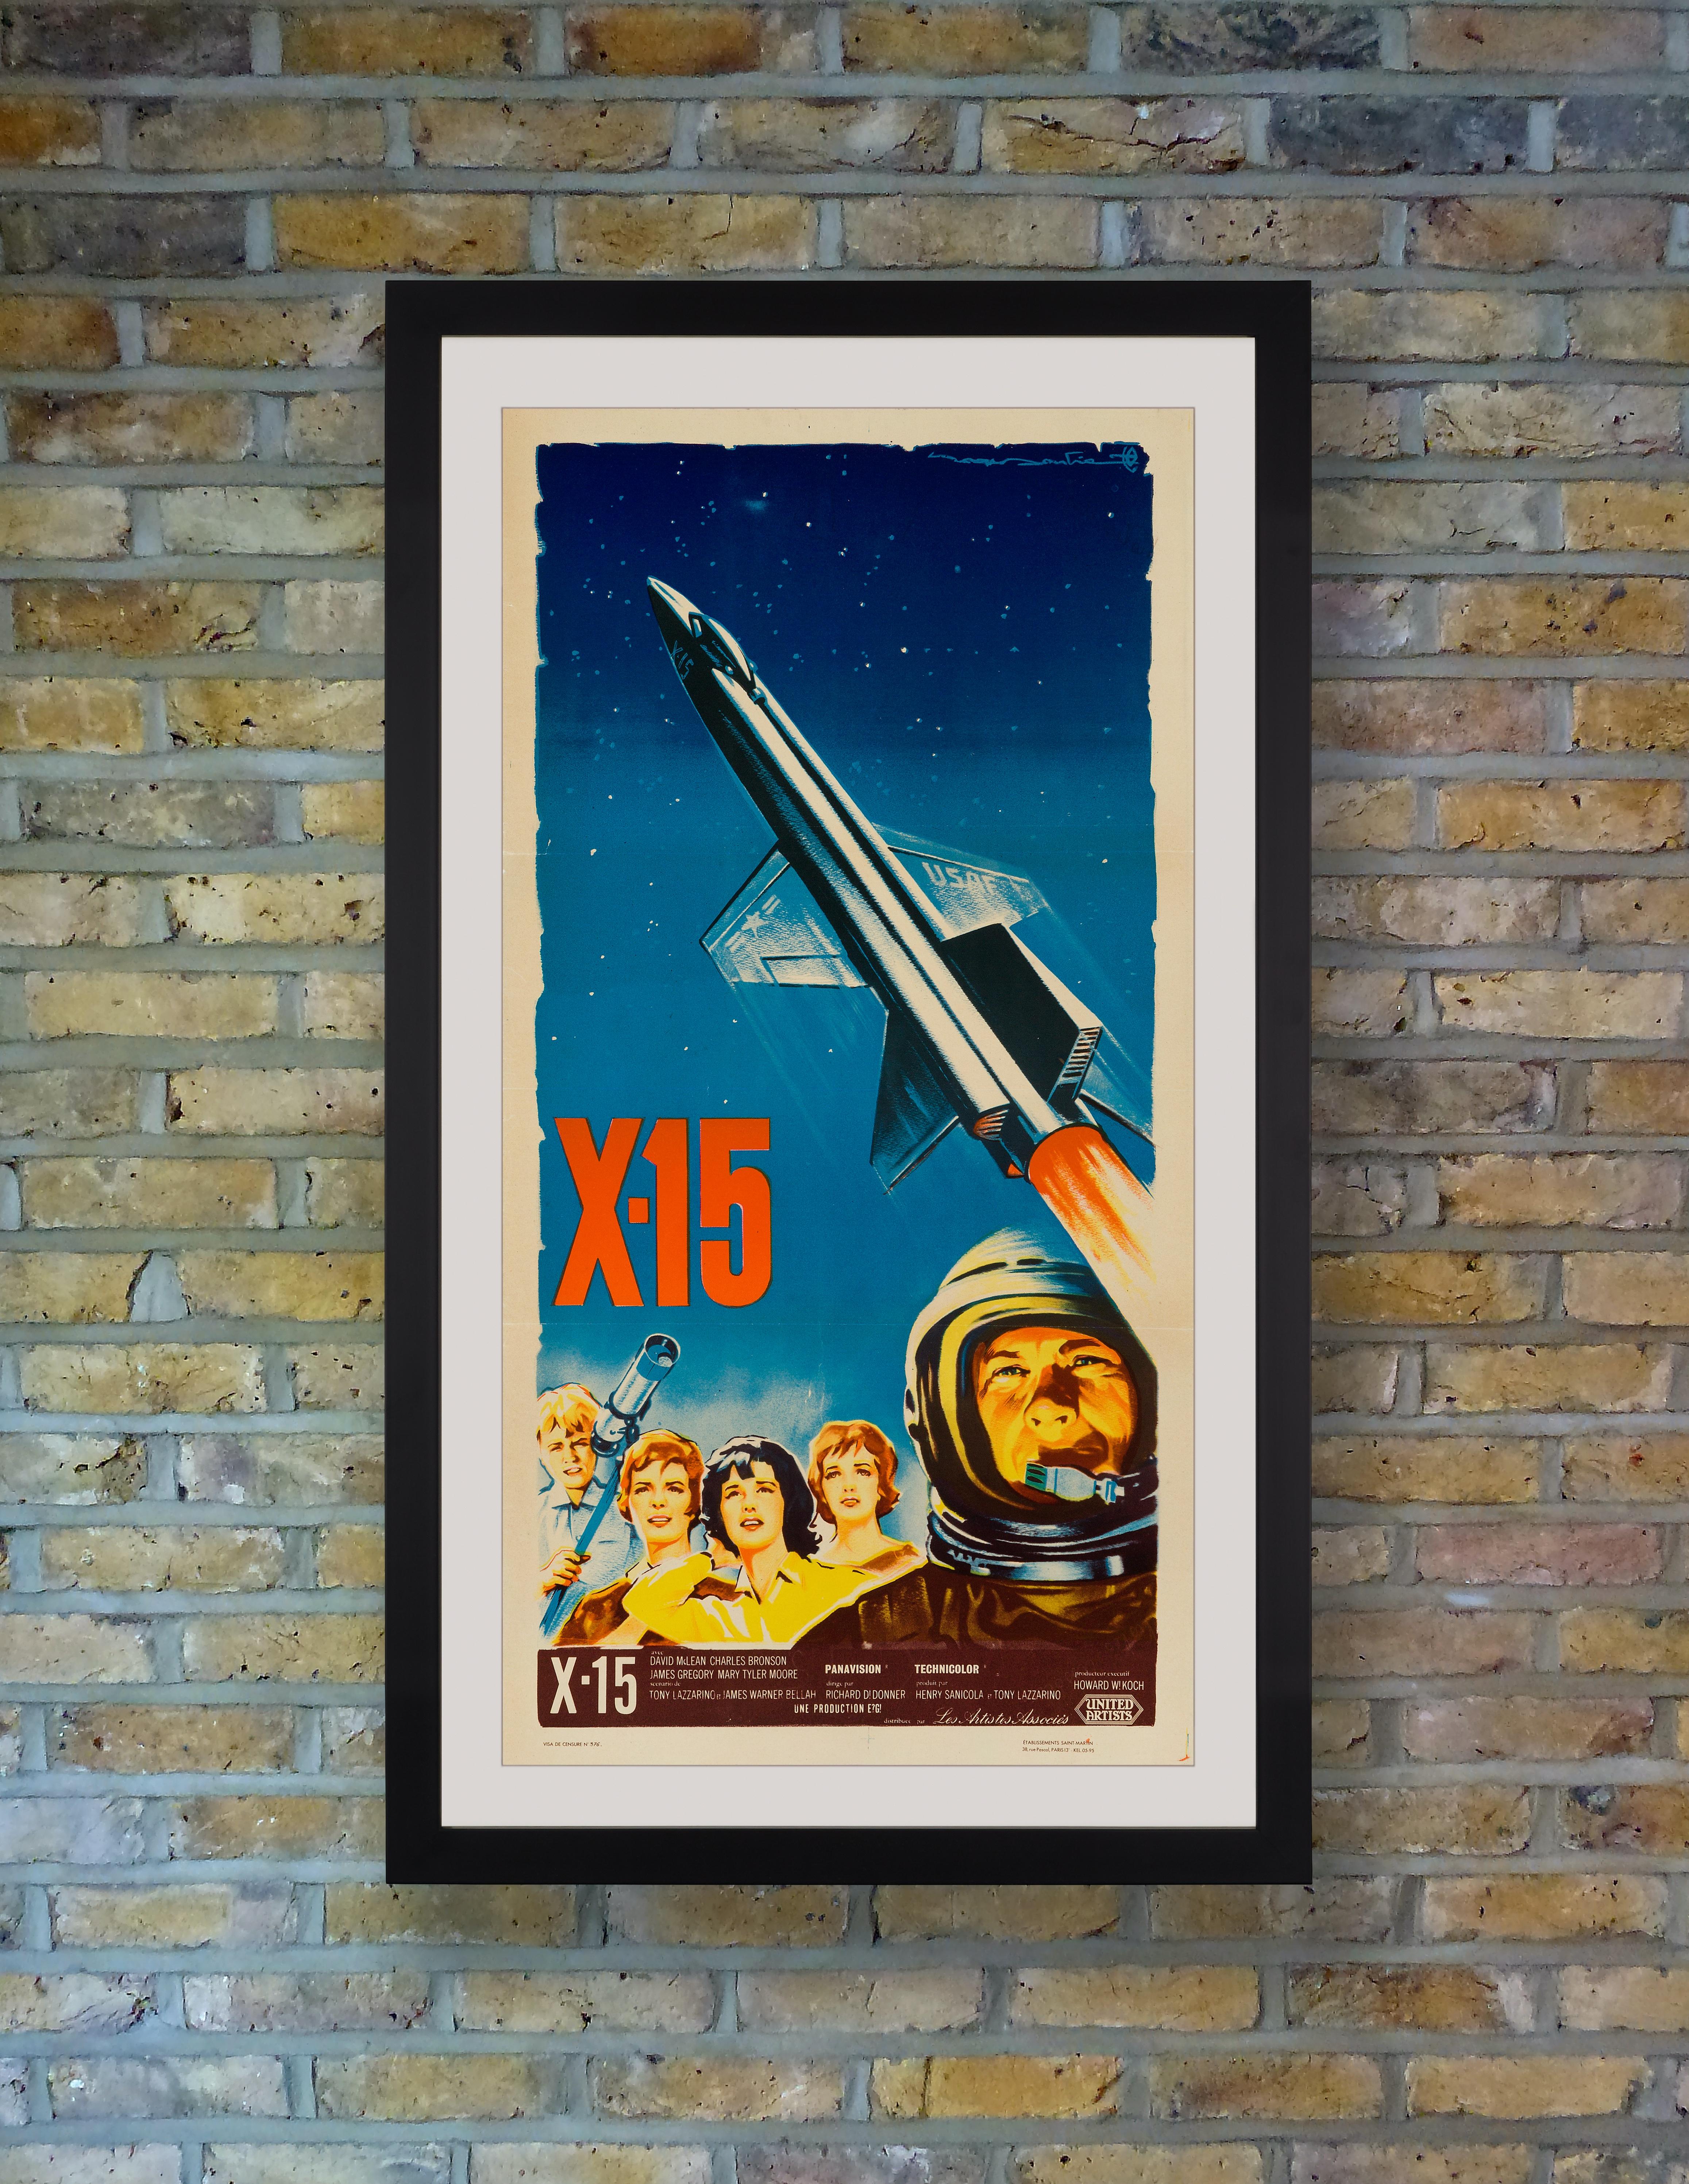 A scarce and striking poster with powerful painterly artwork by prolific poster artist Roger Soubie for the French release of the 1961 American aviation drama 'X-15,' which presented a fictionalized account of the experimental X-15 research rocket